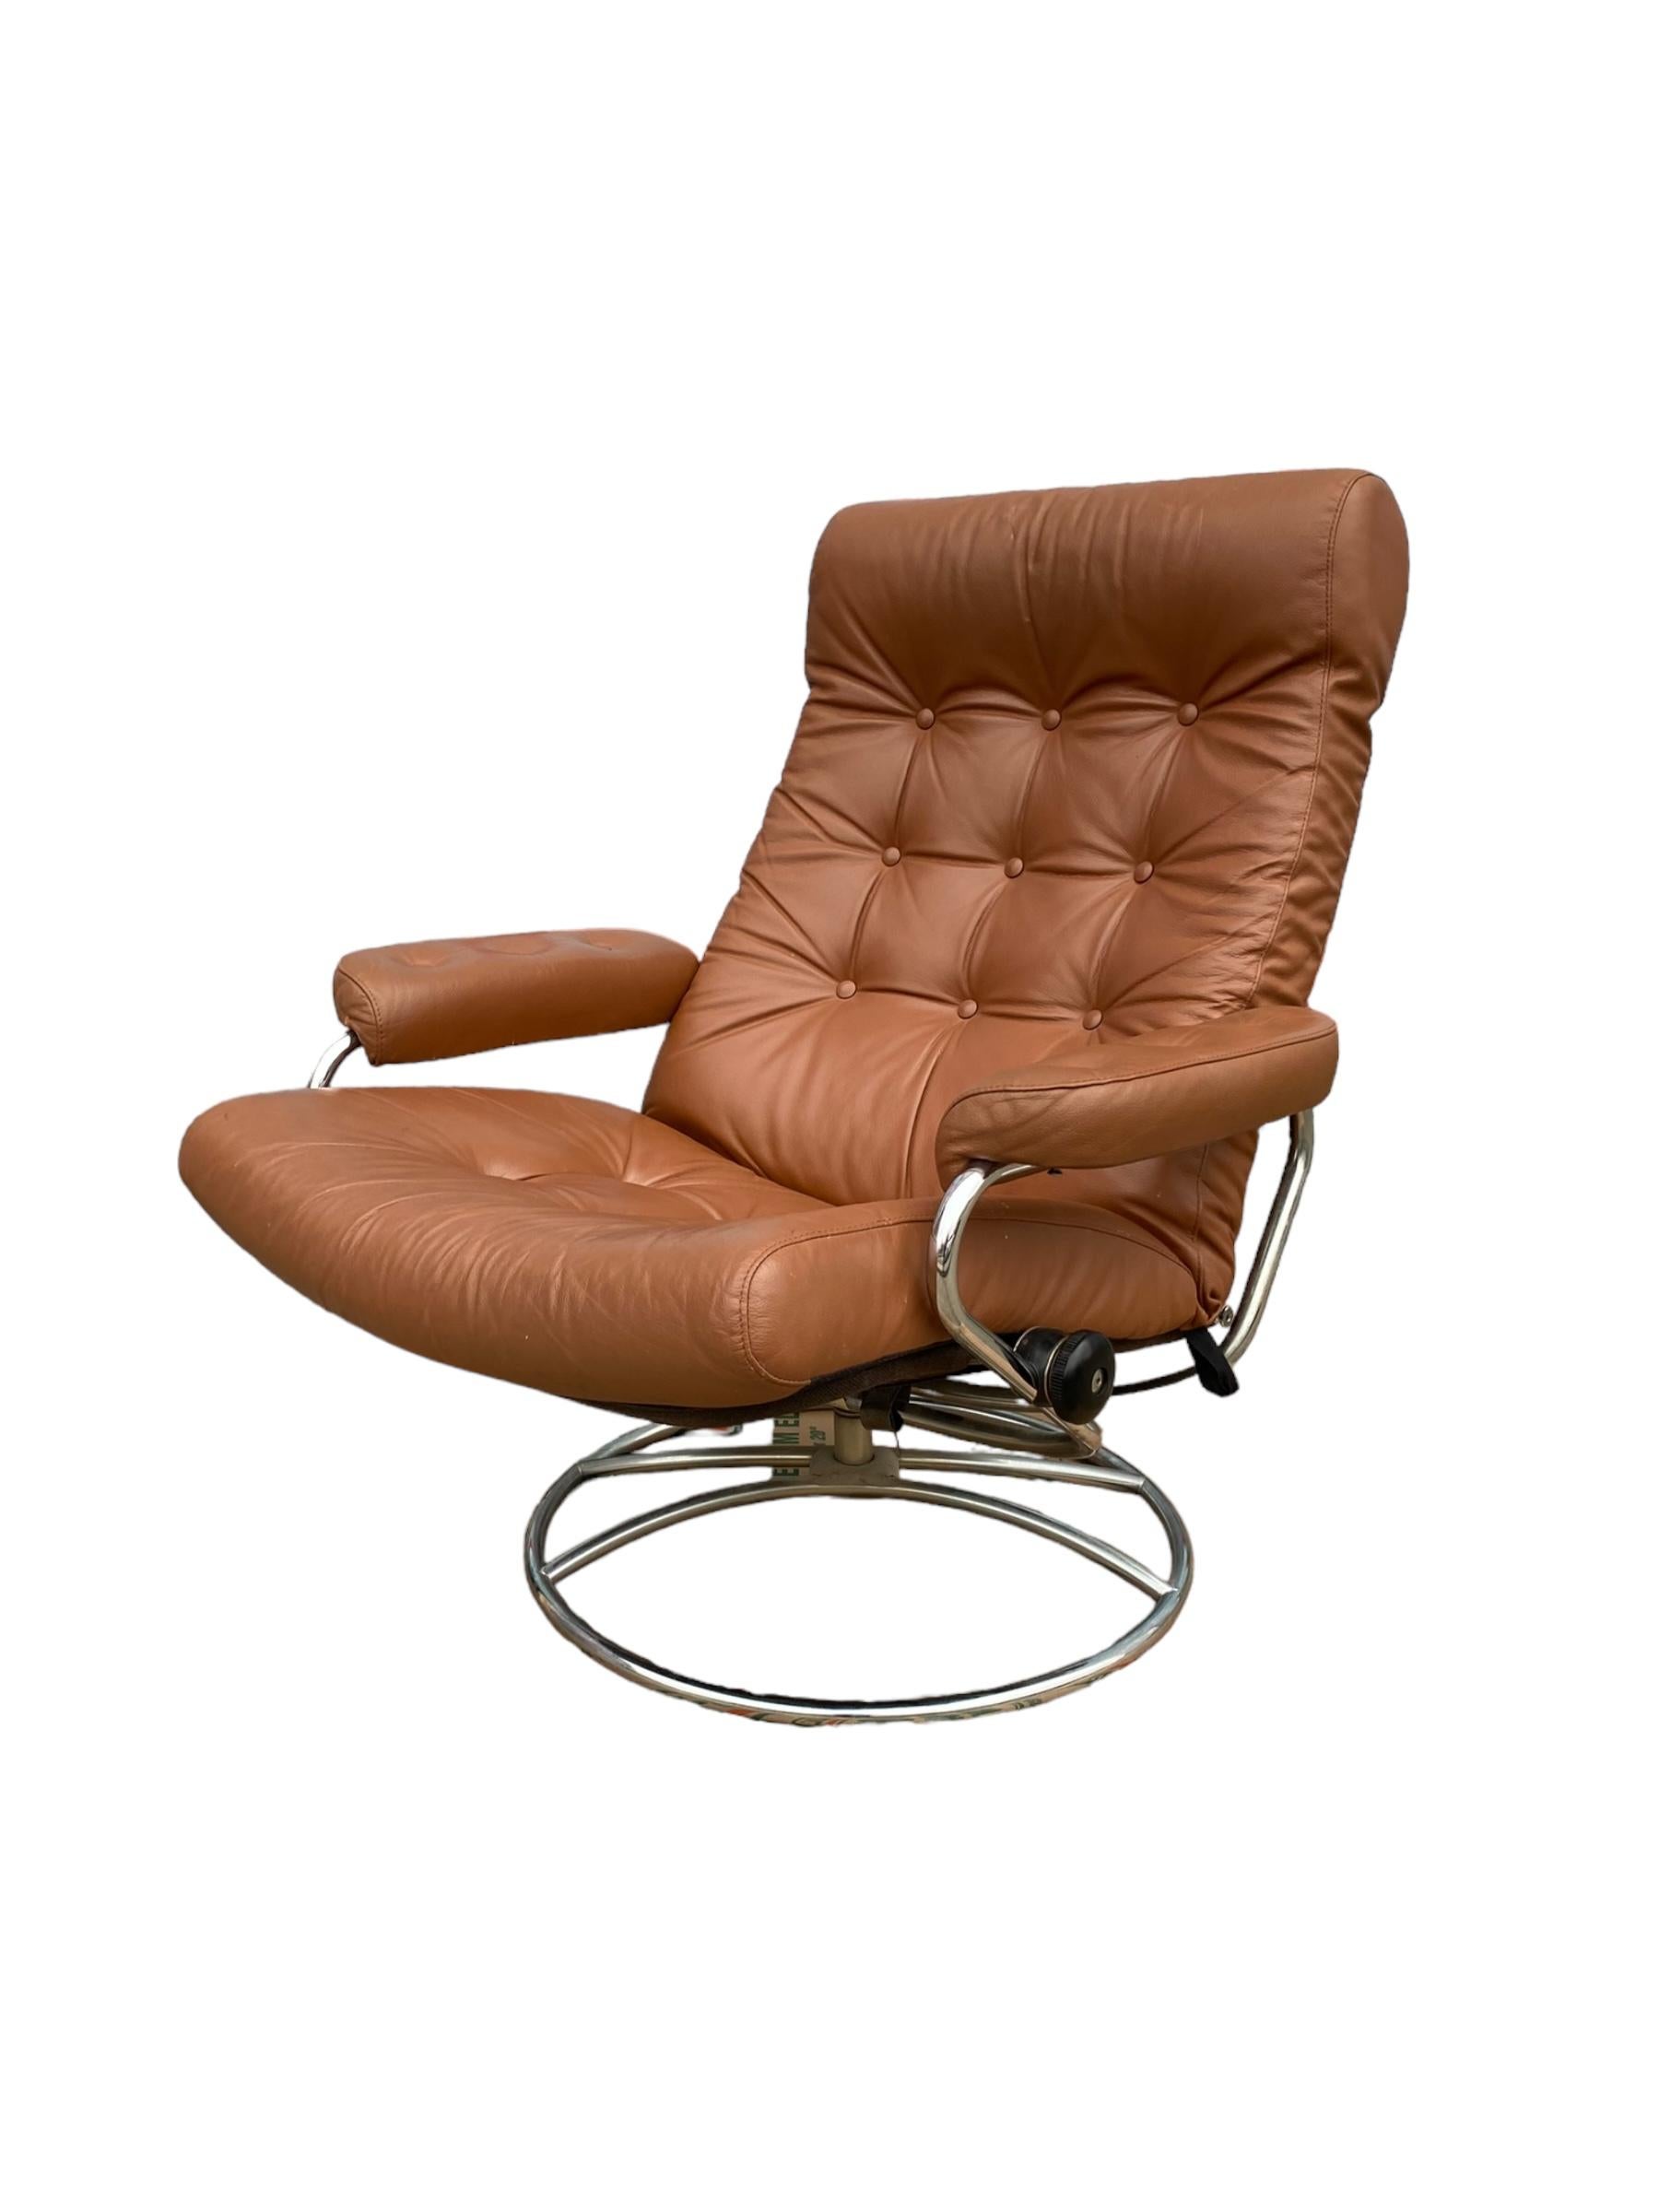 Leather Ekornes Stressless Reclining Lounge Chair and Ottoman in Burnt Orange